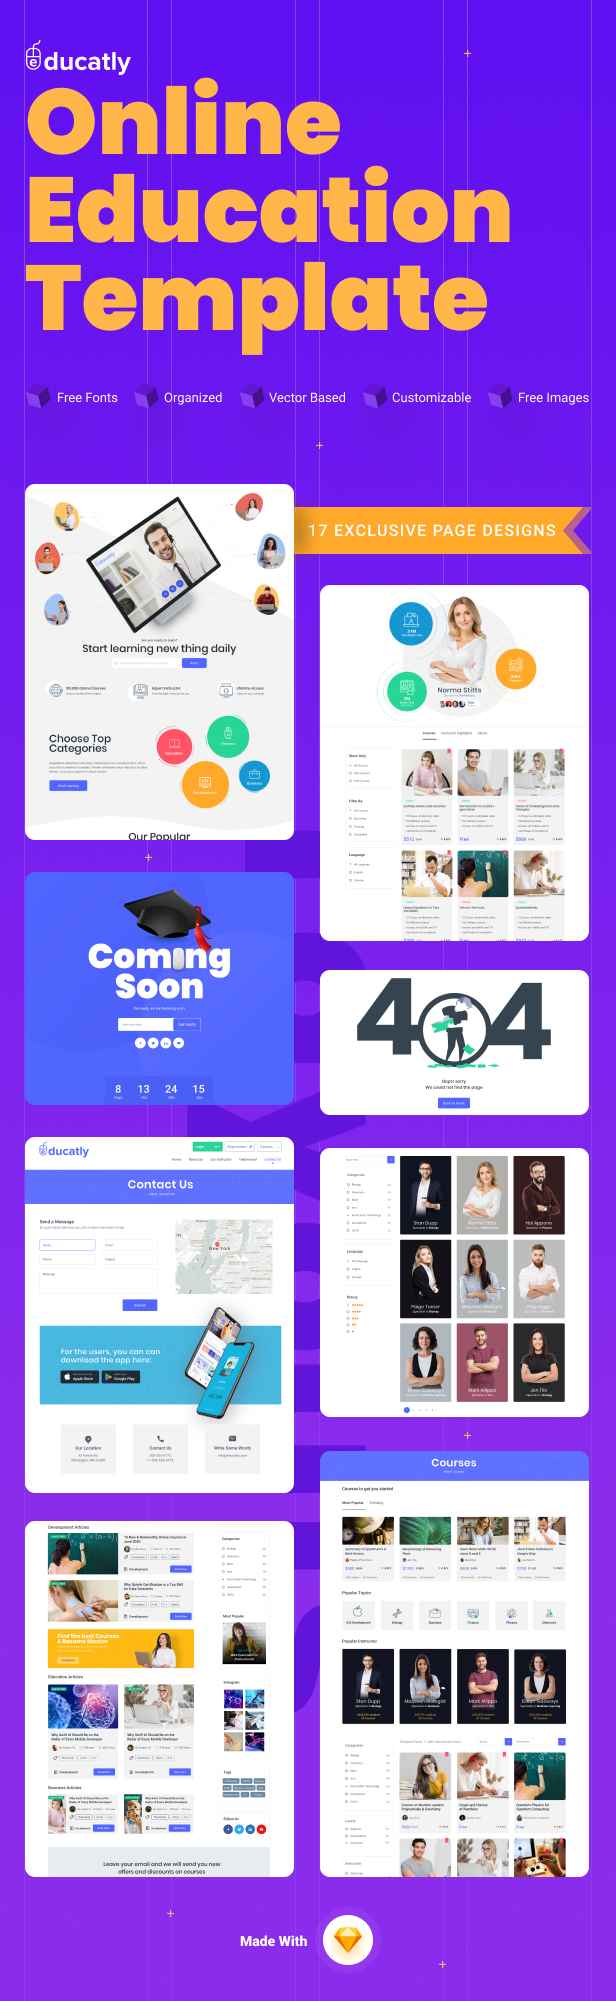 Educatly | E-Learning Website Sketch Template - 2